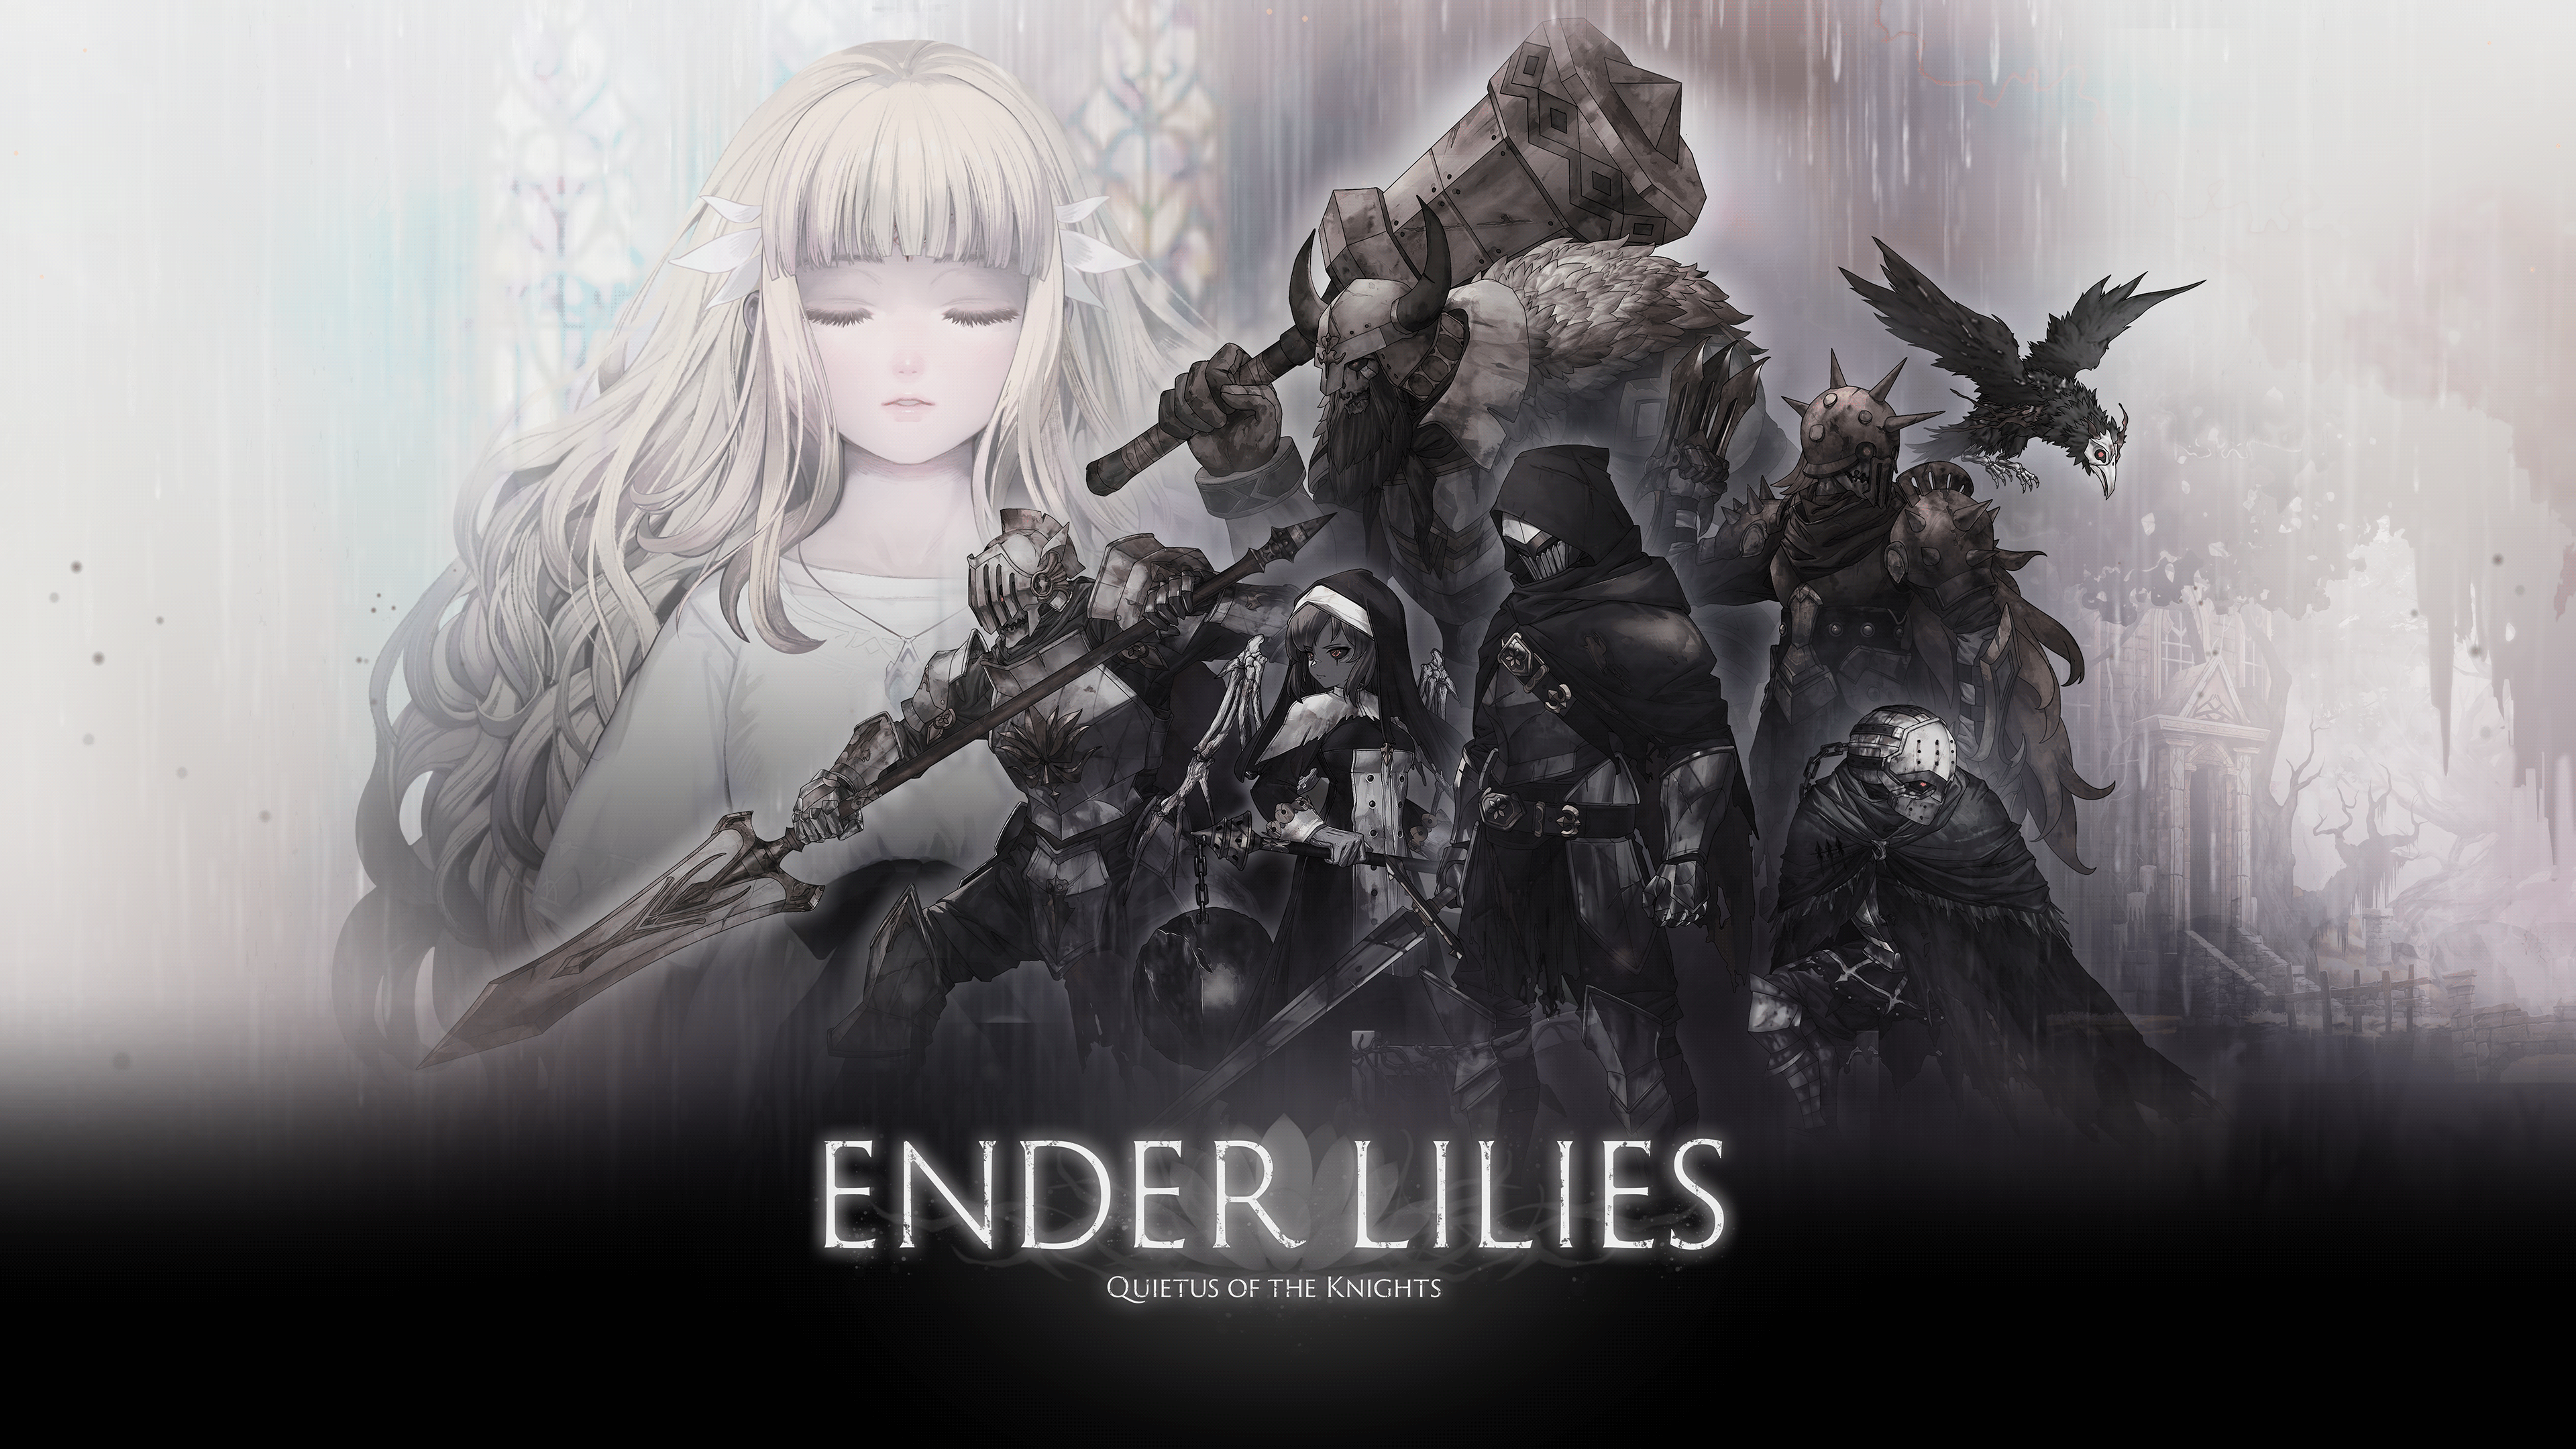 ENDER LILIES: Quietus of the Knights』リリース一周年記念セール開催